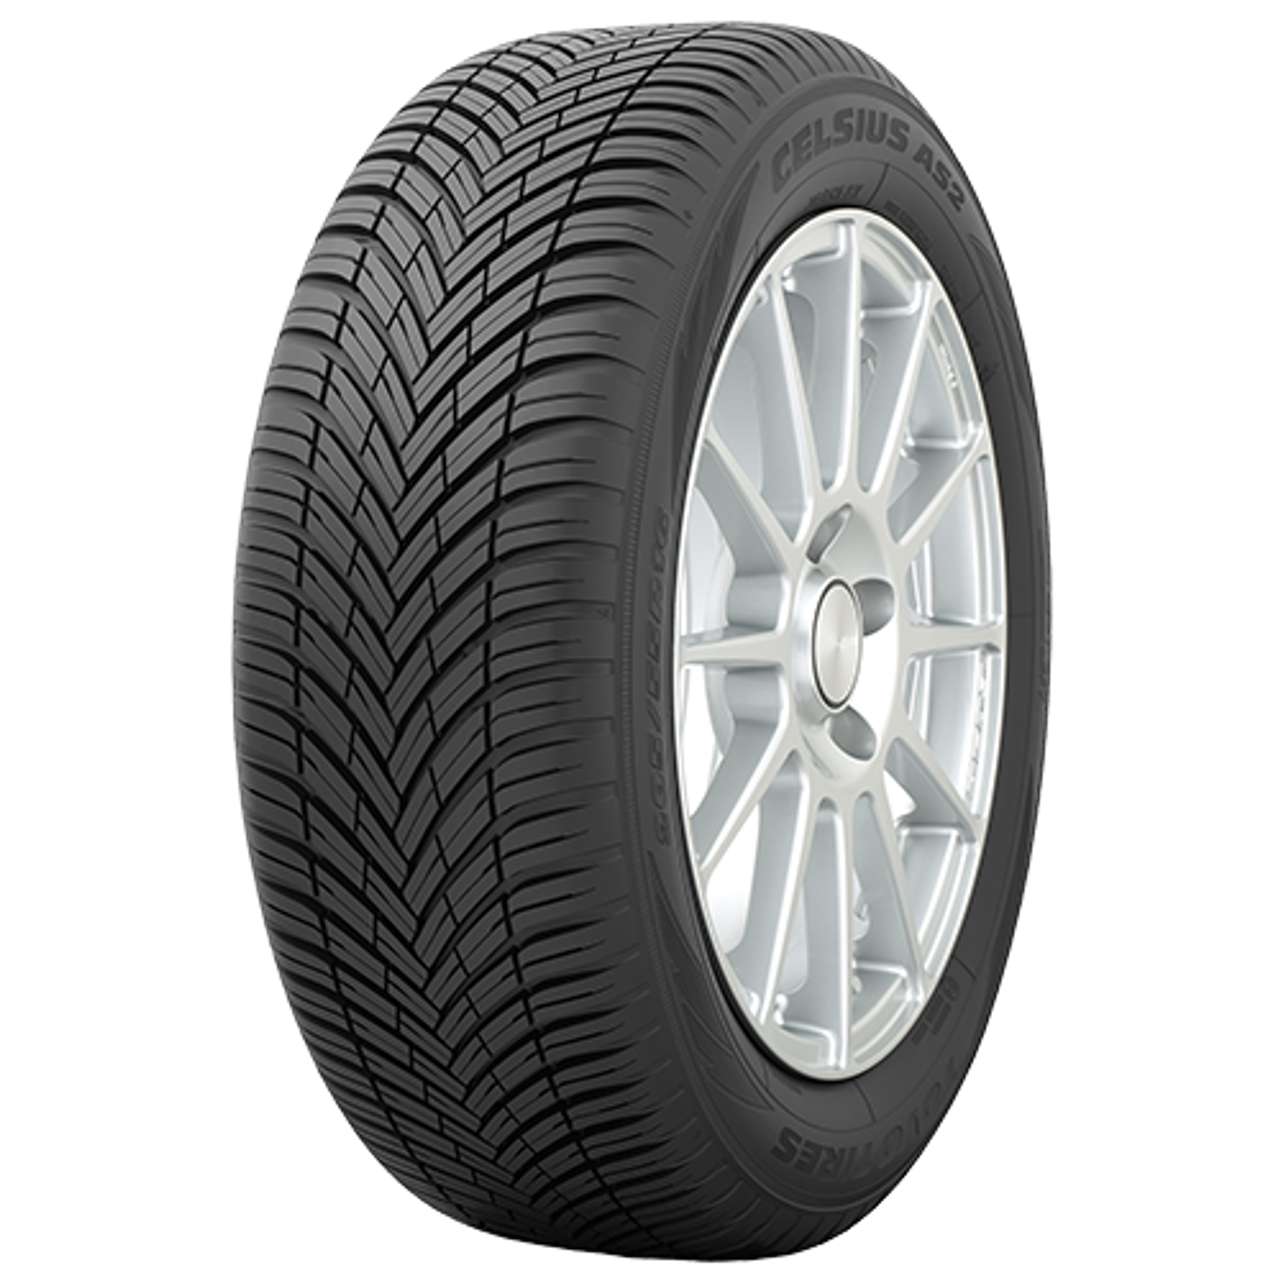 TOYO CELSIUS AS2 185/65R15 92V BSW